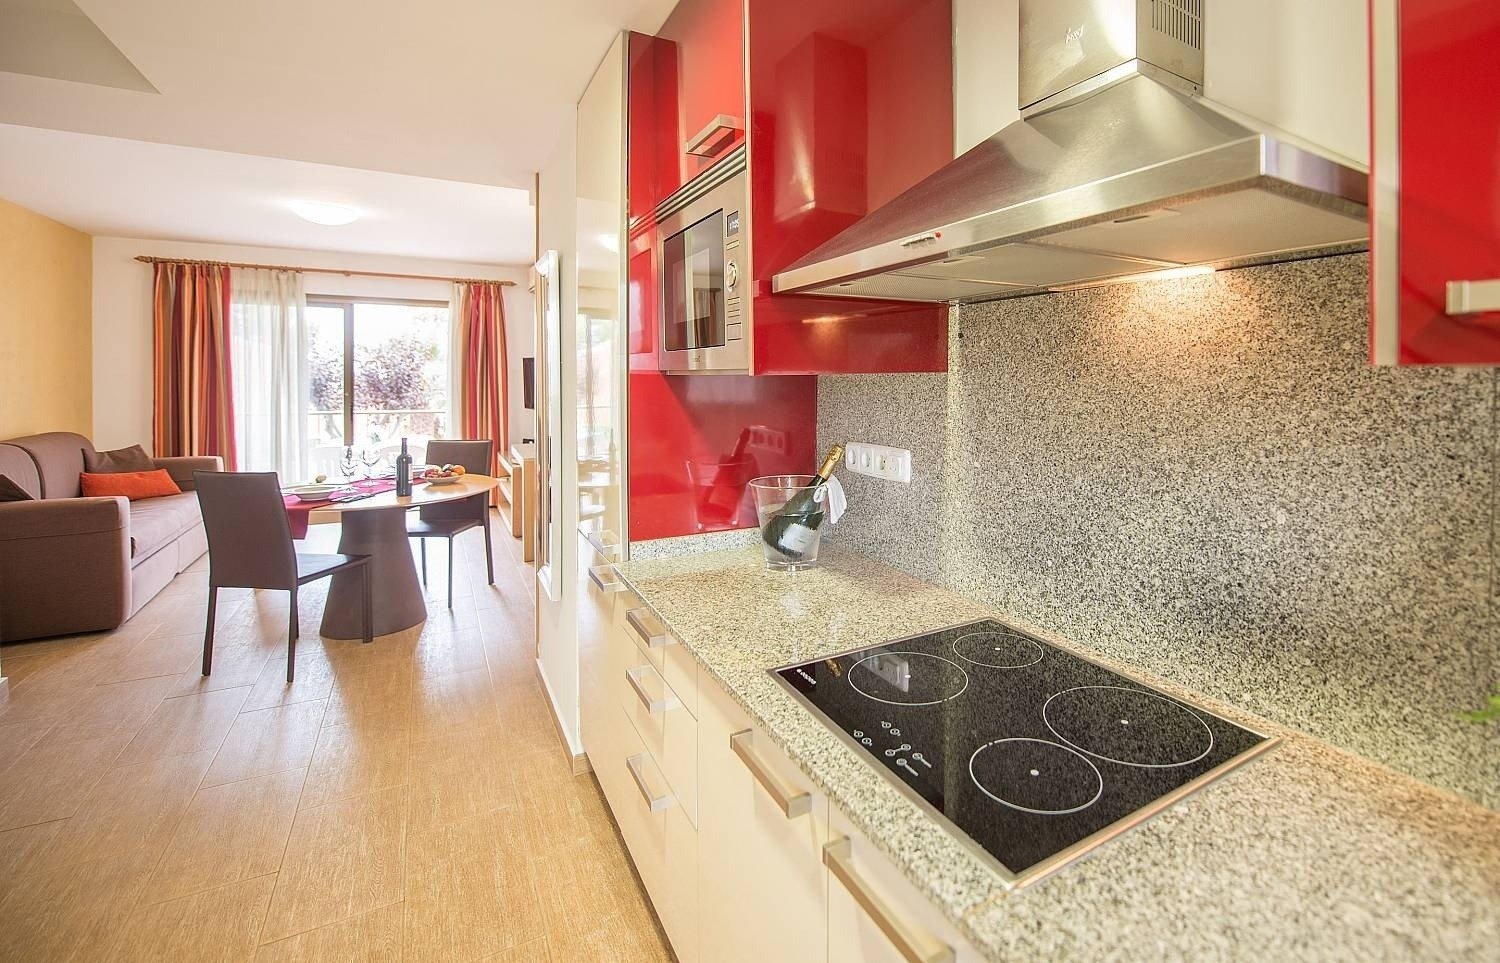 Kitchen of the Ona Aucanada hotel apartment in the North of Majorca